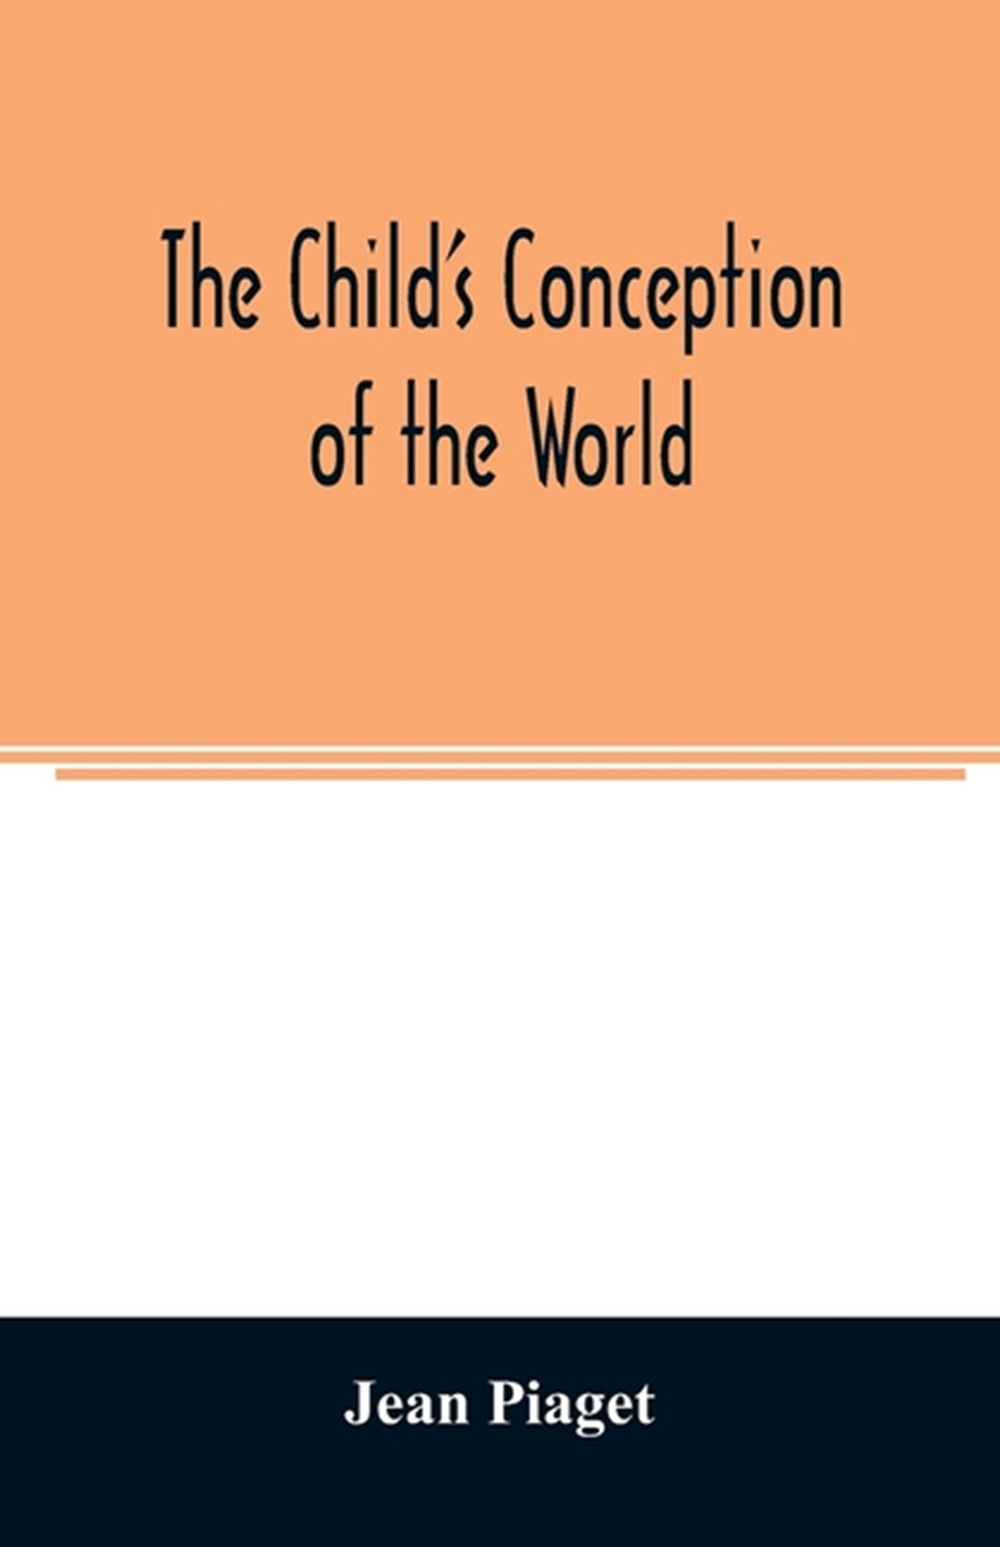 child's conception of the world